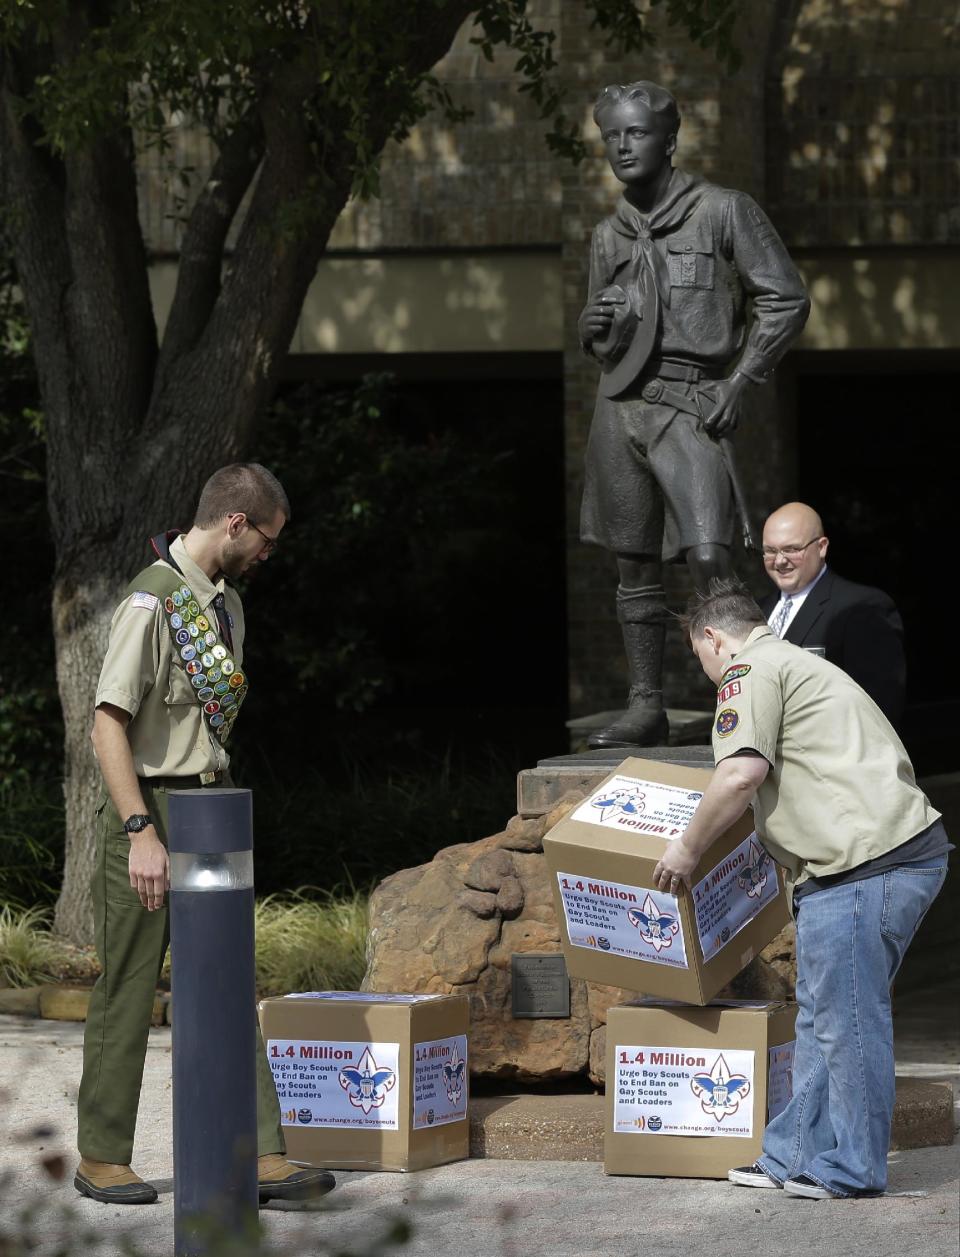 FILE - In this Feb. 4, 2013 fill photo Eagle Scout Will Oliver, Duxbury, Mass., left, and former den leader Jennifer Tyrrell of Bridgeport, Ohio, place boxes filled with a petition urging the Boy Scouts of America to end a policy banning gay scouts in front of the BAS headquarters in Dallas, Texas. The BSA said Wednesday, Feb. 12, 2014 that it lost 6 percent of its membership after an often-bruising year in which it announced it would accept openly gay boys for the first time, over the objections of some participants who eventually left the organization. (AP Photo/Tony Gutierrez, File)